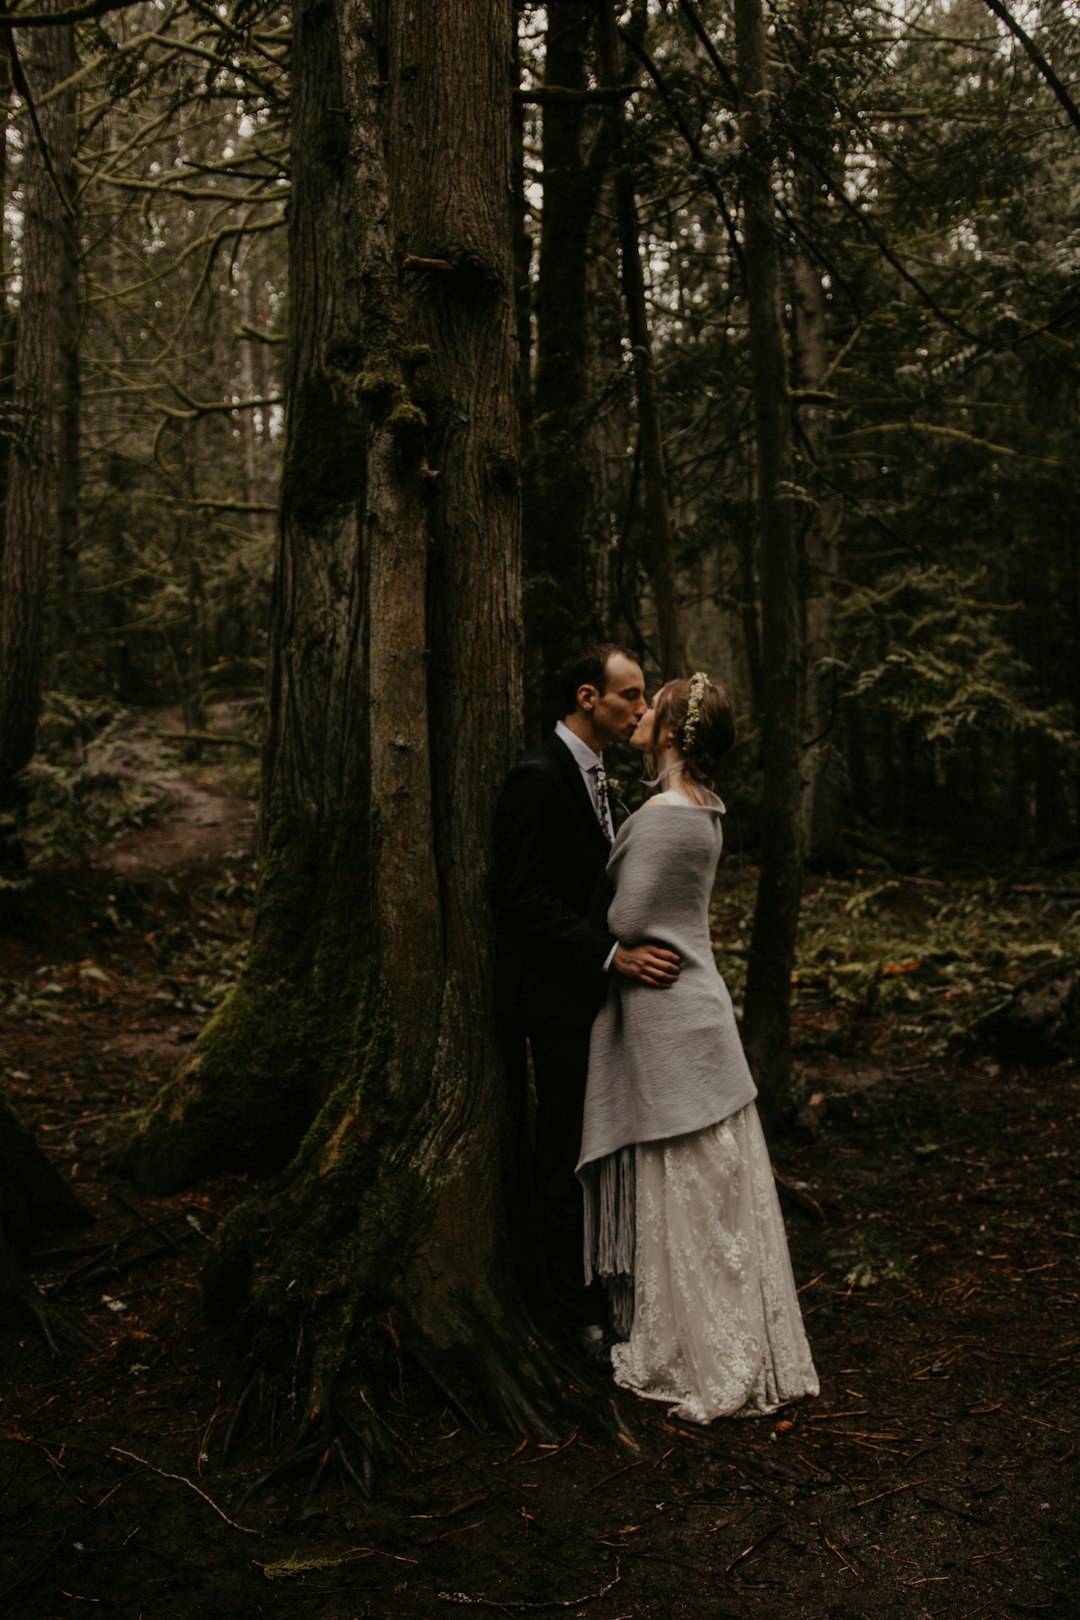 man and woman kissing in forest during daytime